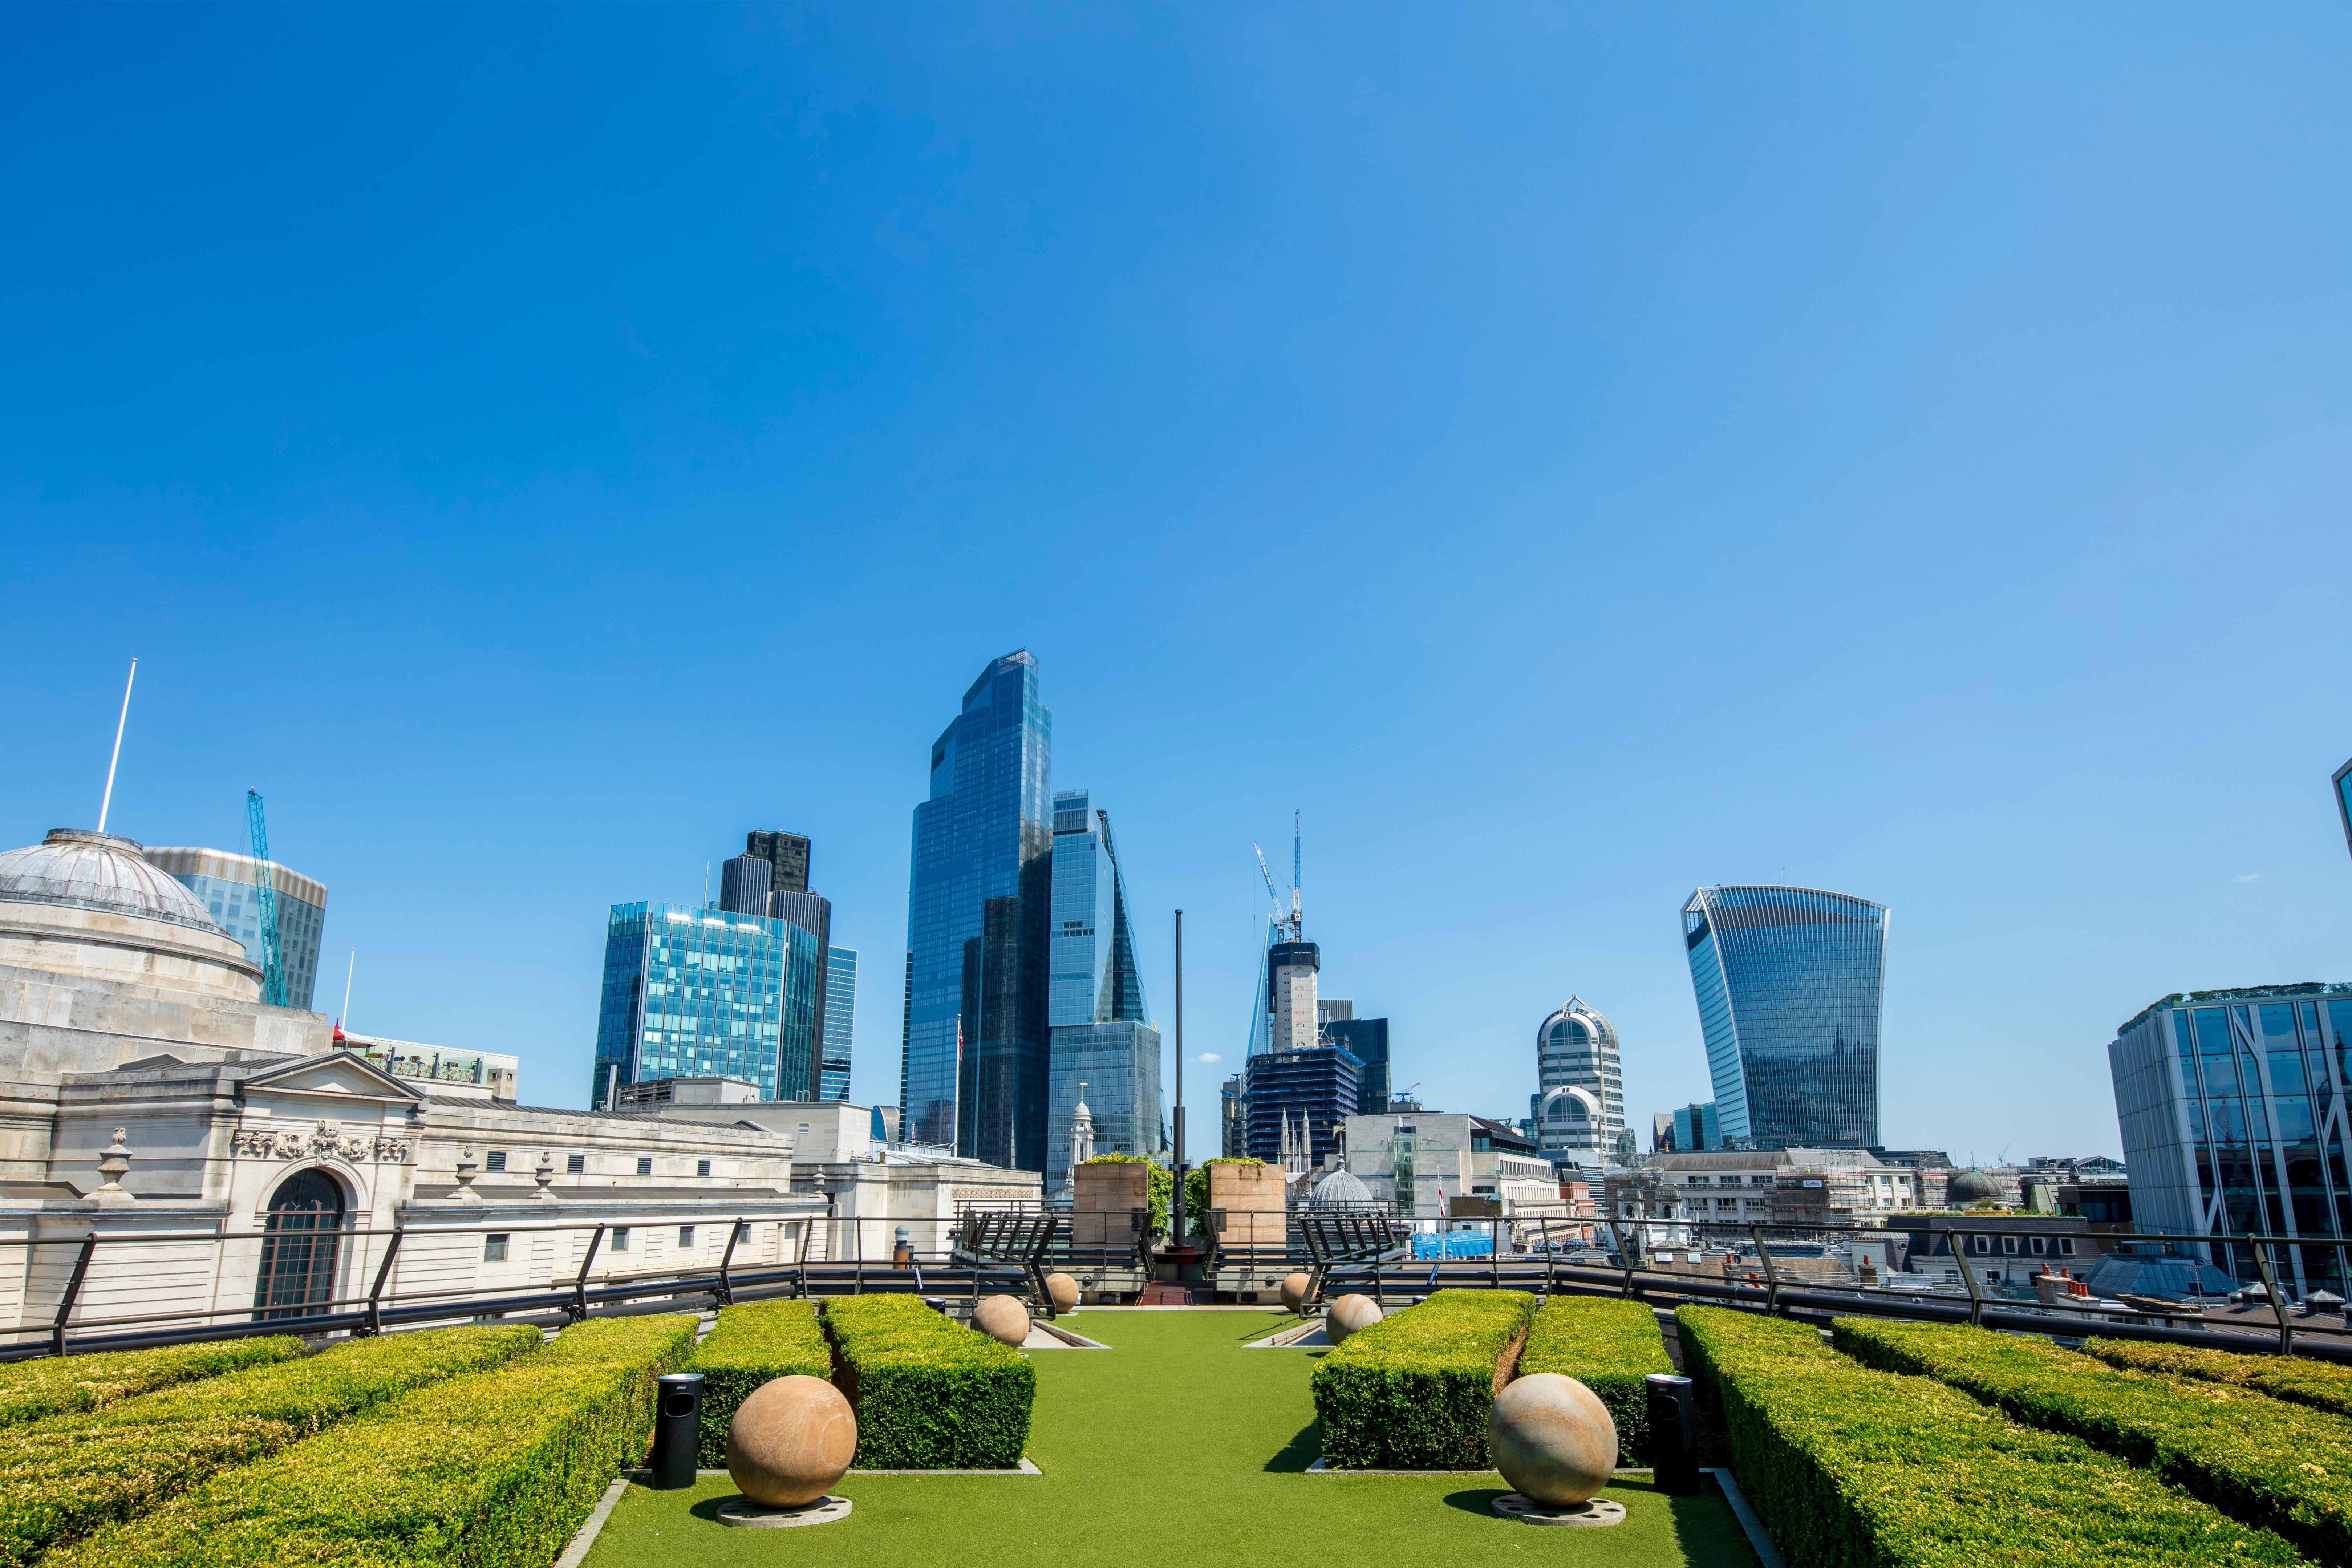 Take in some of the best city views in London at Coq d’Argent